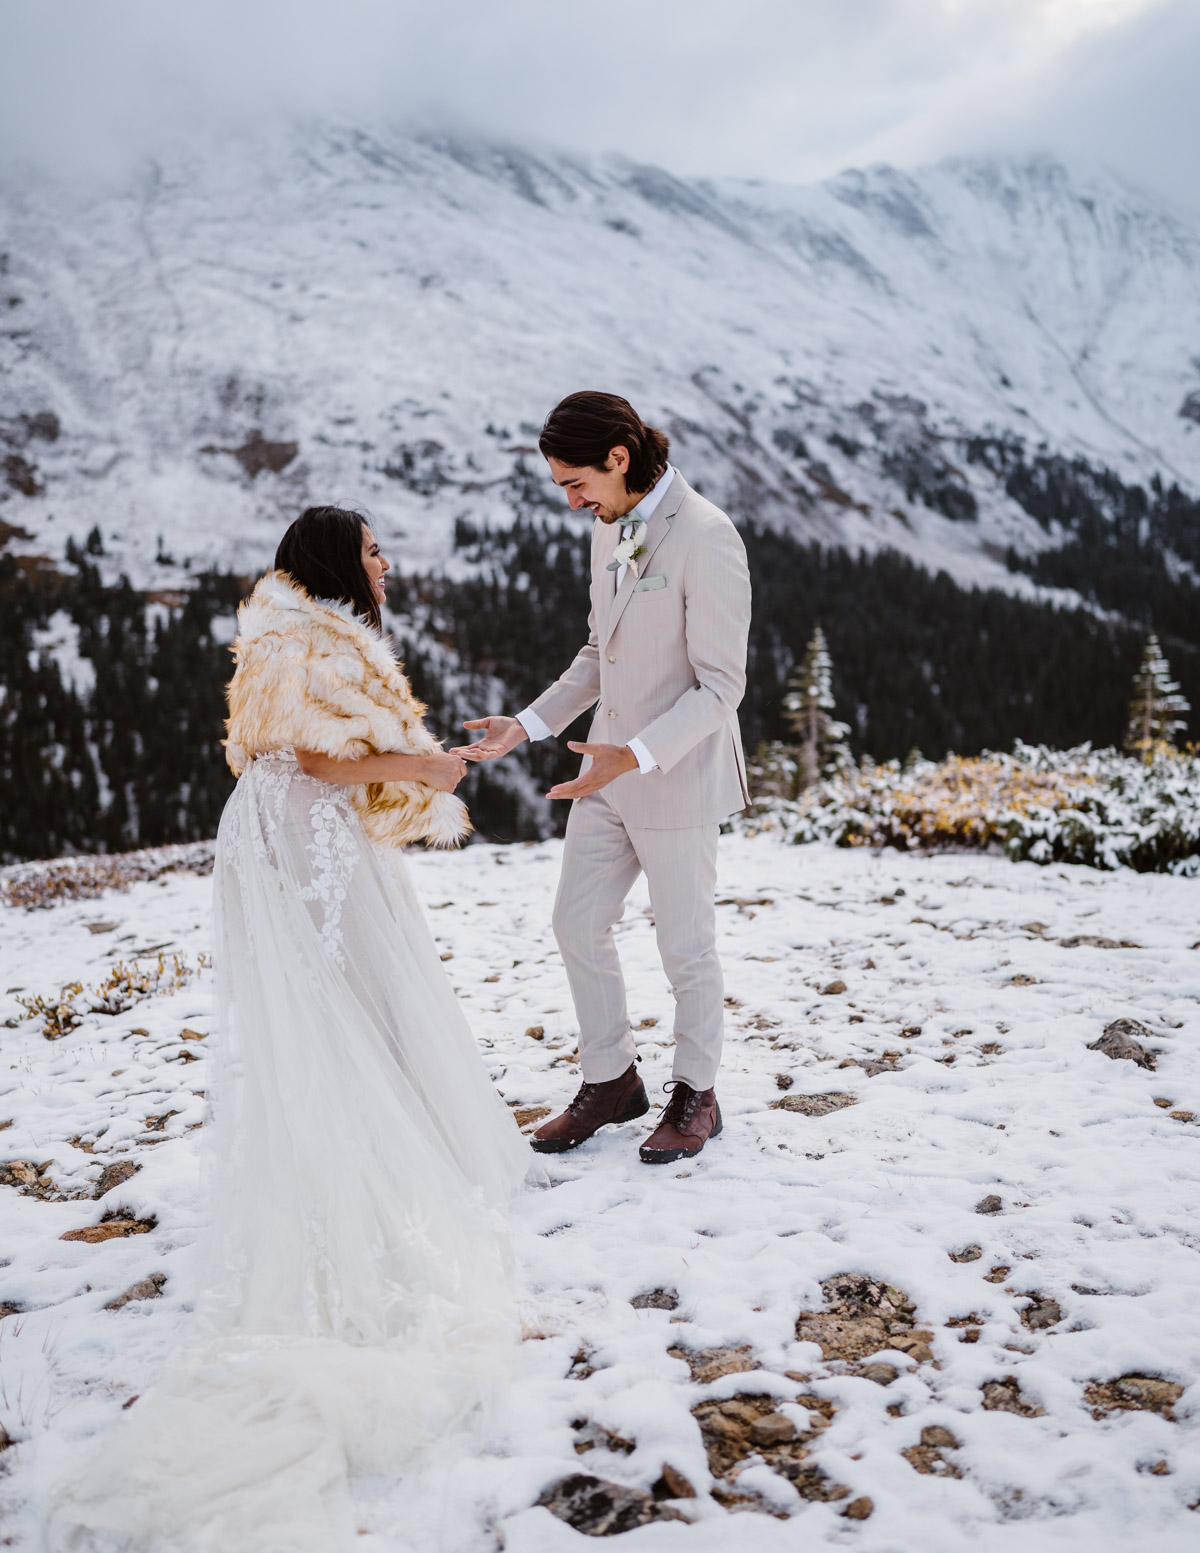 Mountaintop Elopement In Colorado During The First Snowfall